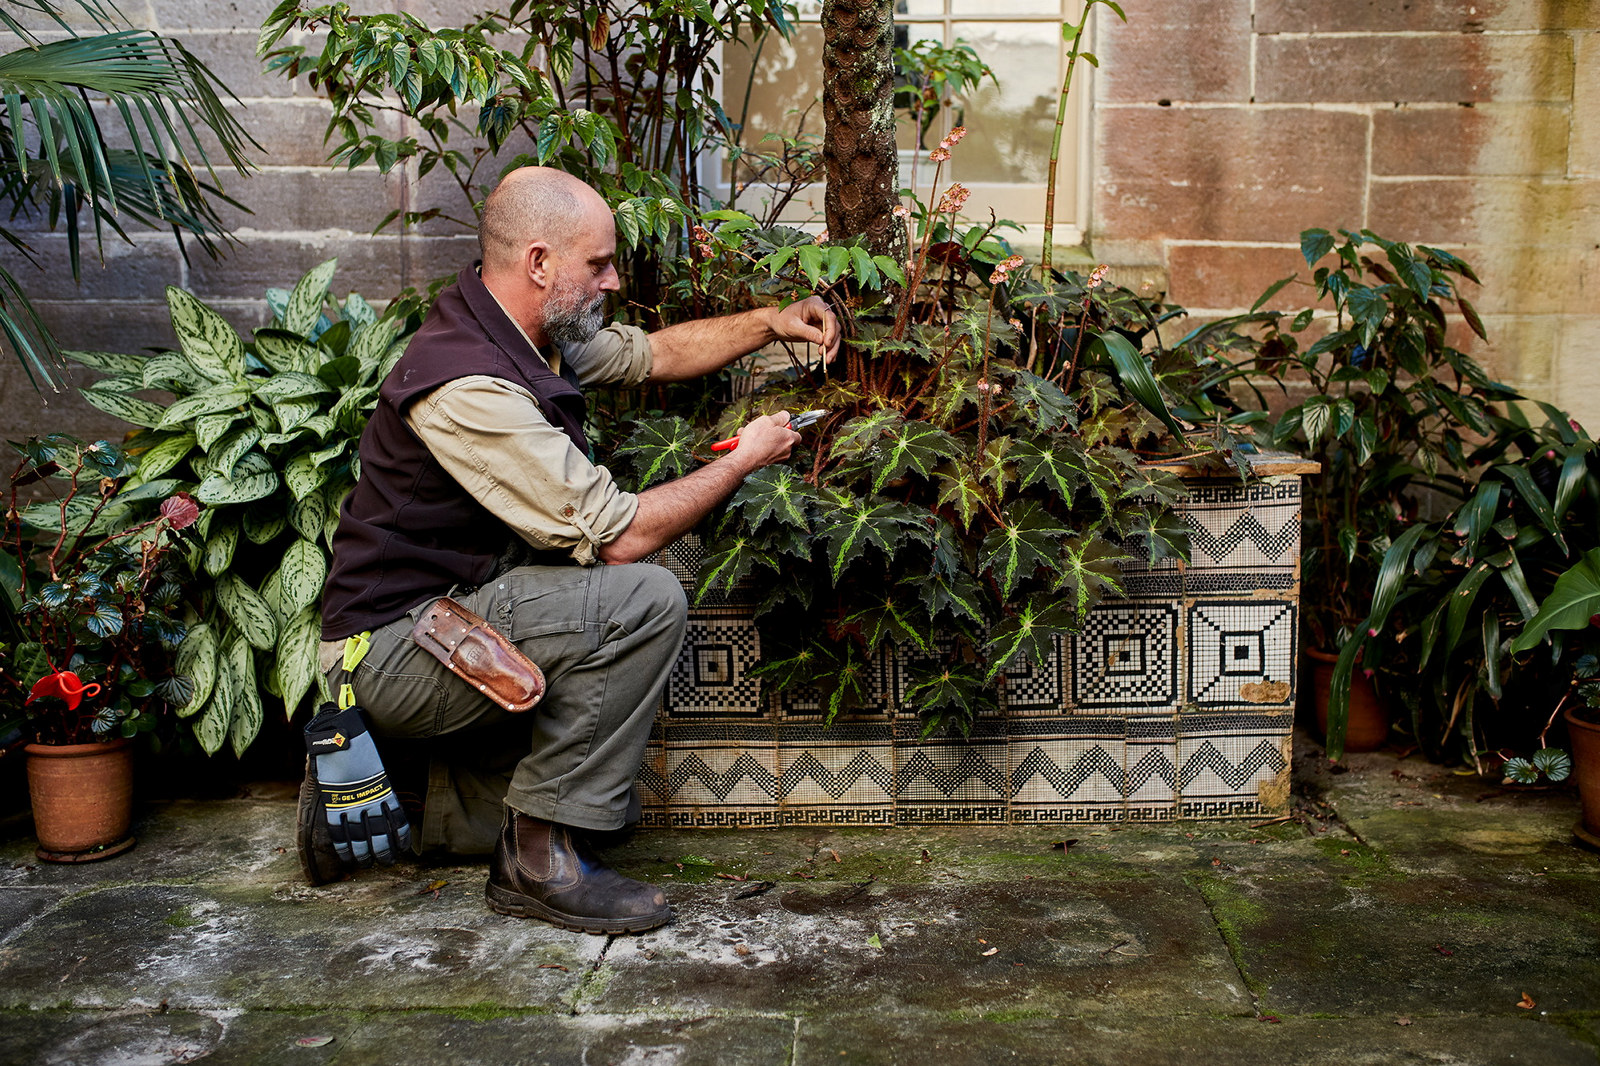 Man tending potted plants on stand.